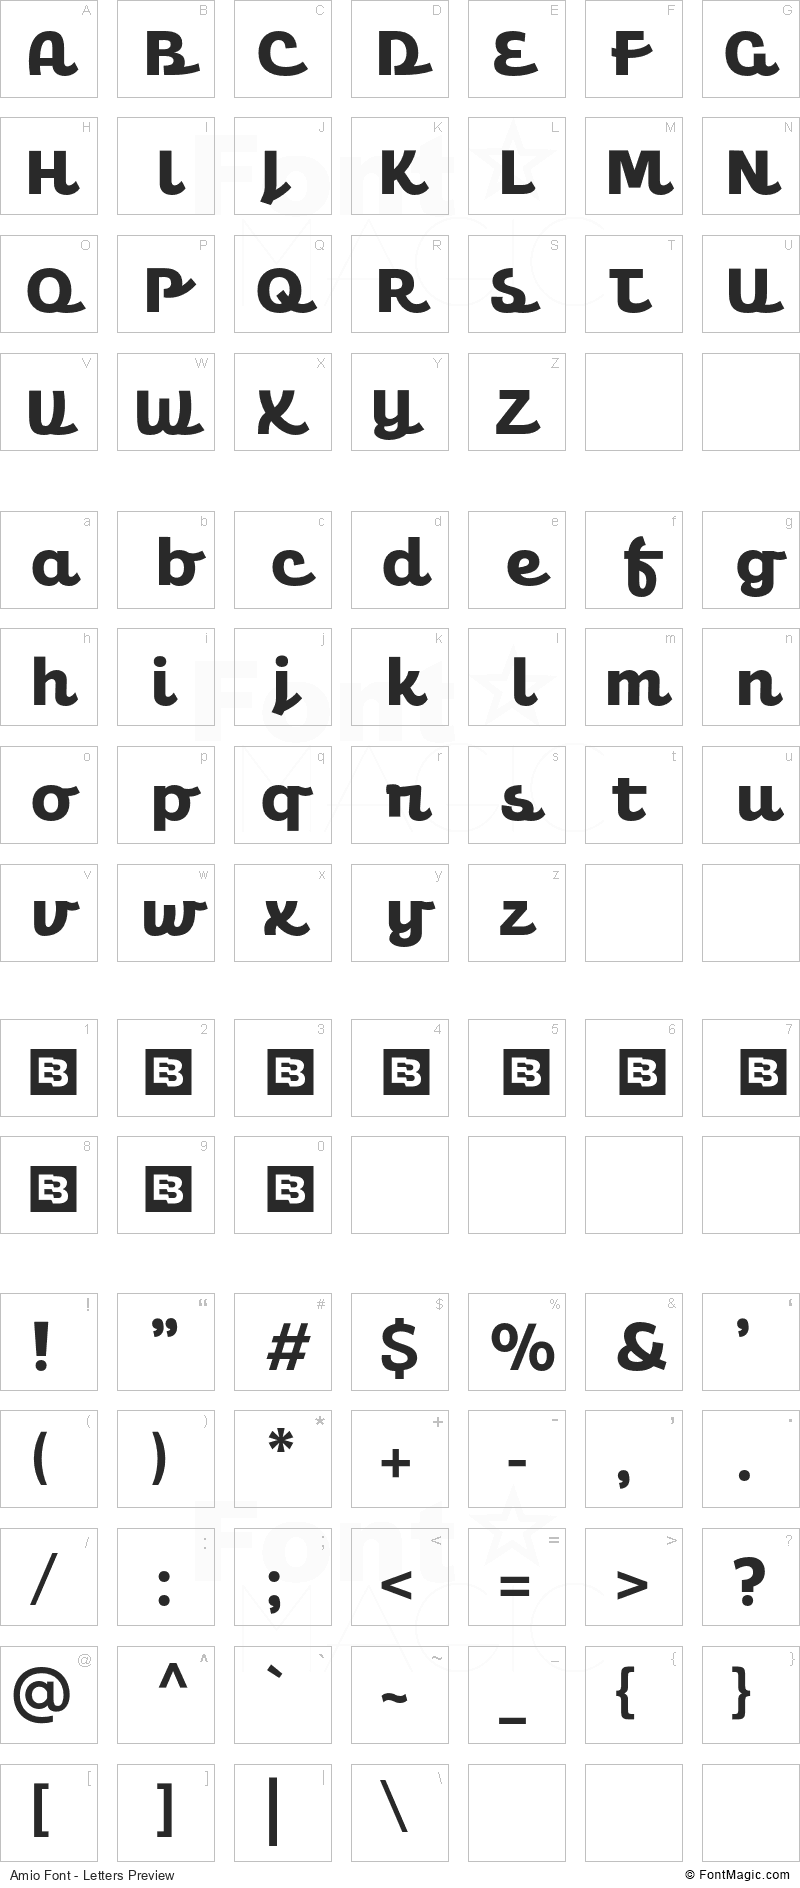 Amio Font - All Latters Preview Chart